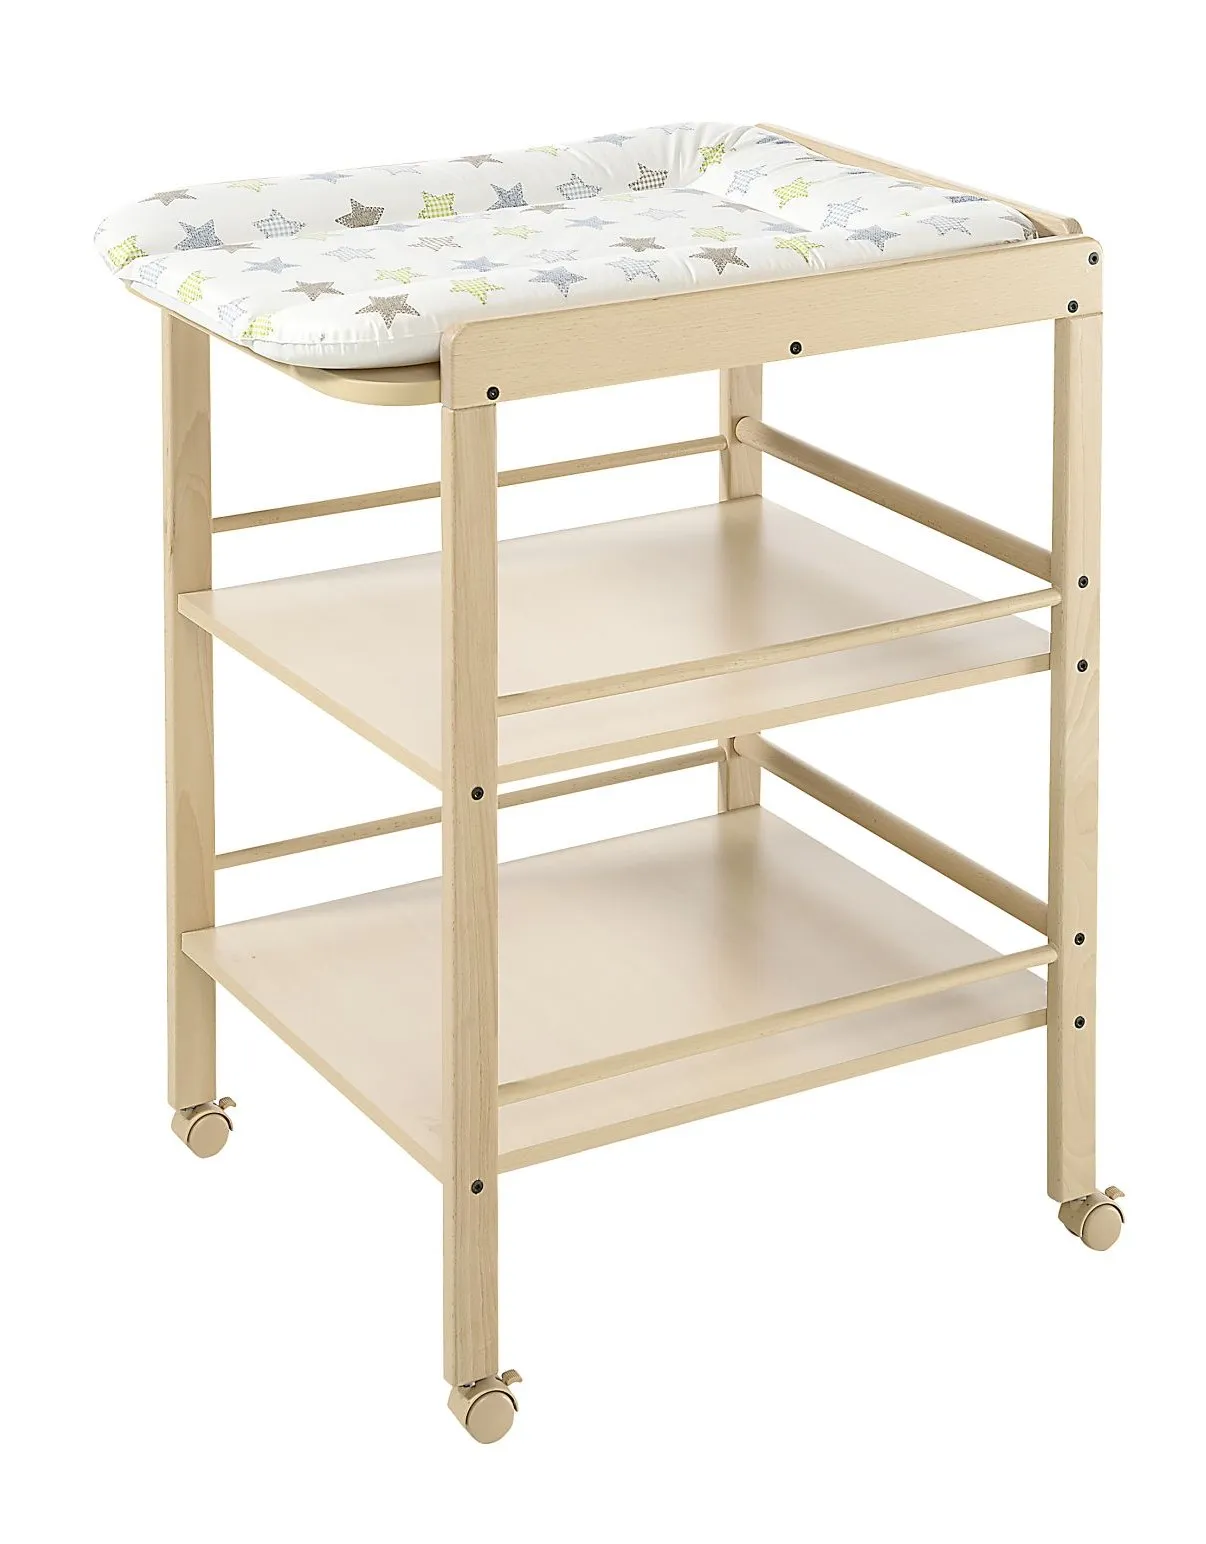 Clarissa changing table